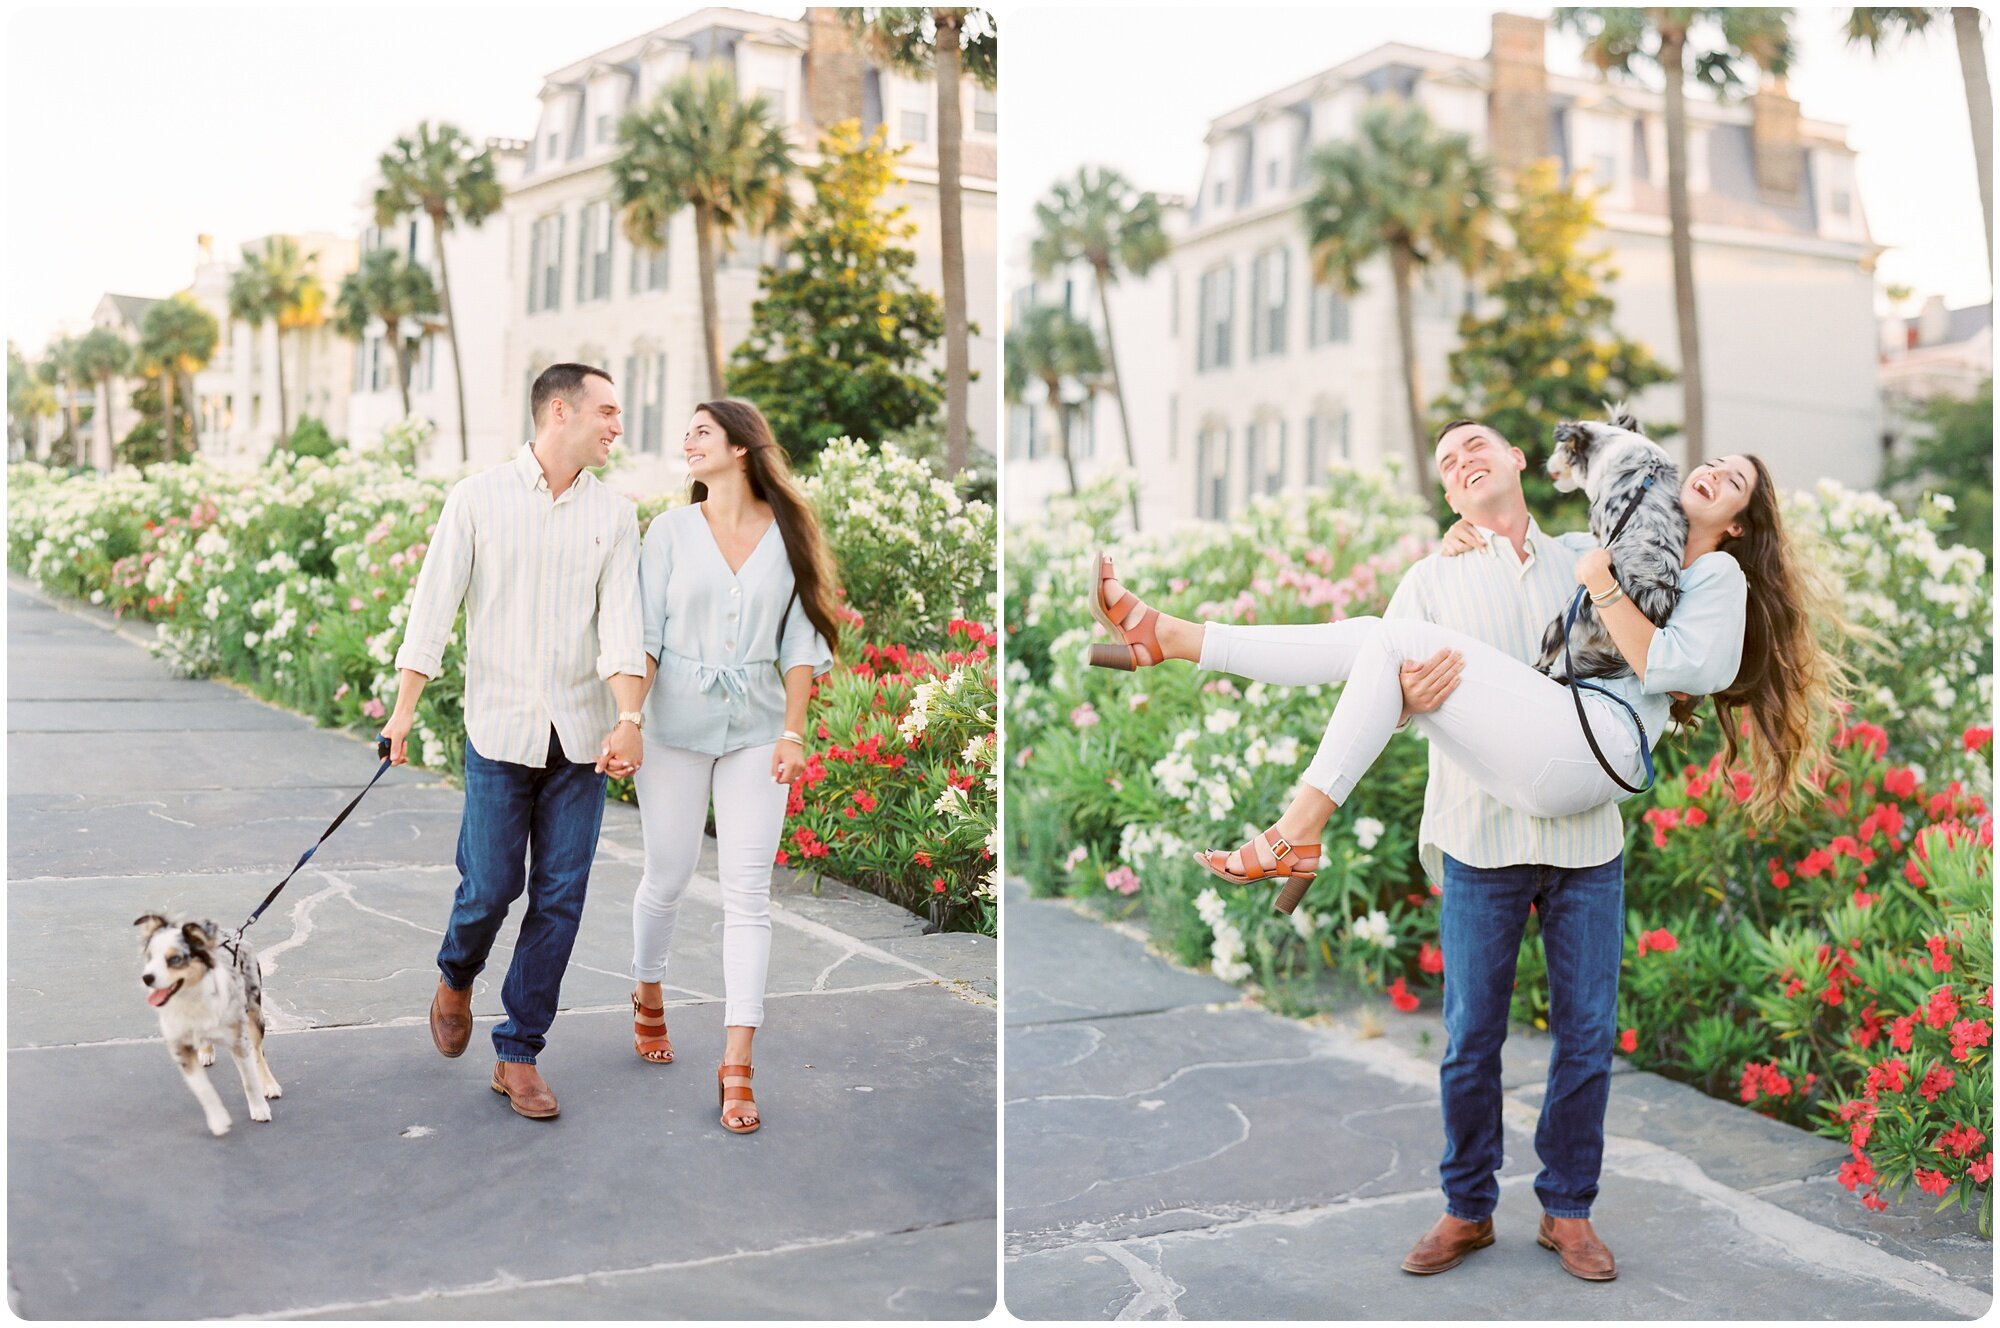 rainbow_row_yellow_blue_outfit_battery_downtown_charleston_engagement_puppy_outdoor_wedding_photographers_husband_wife_team_kailee_tim_kailee_dimeglio_photography_charleston_traveling_photographers_0018.jpg